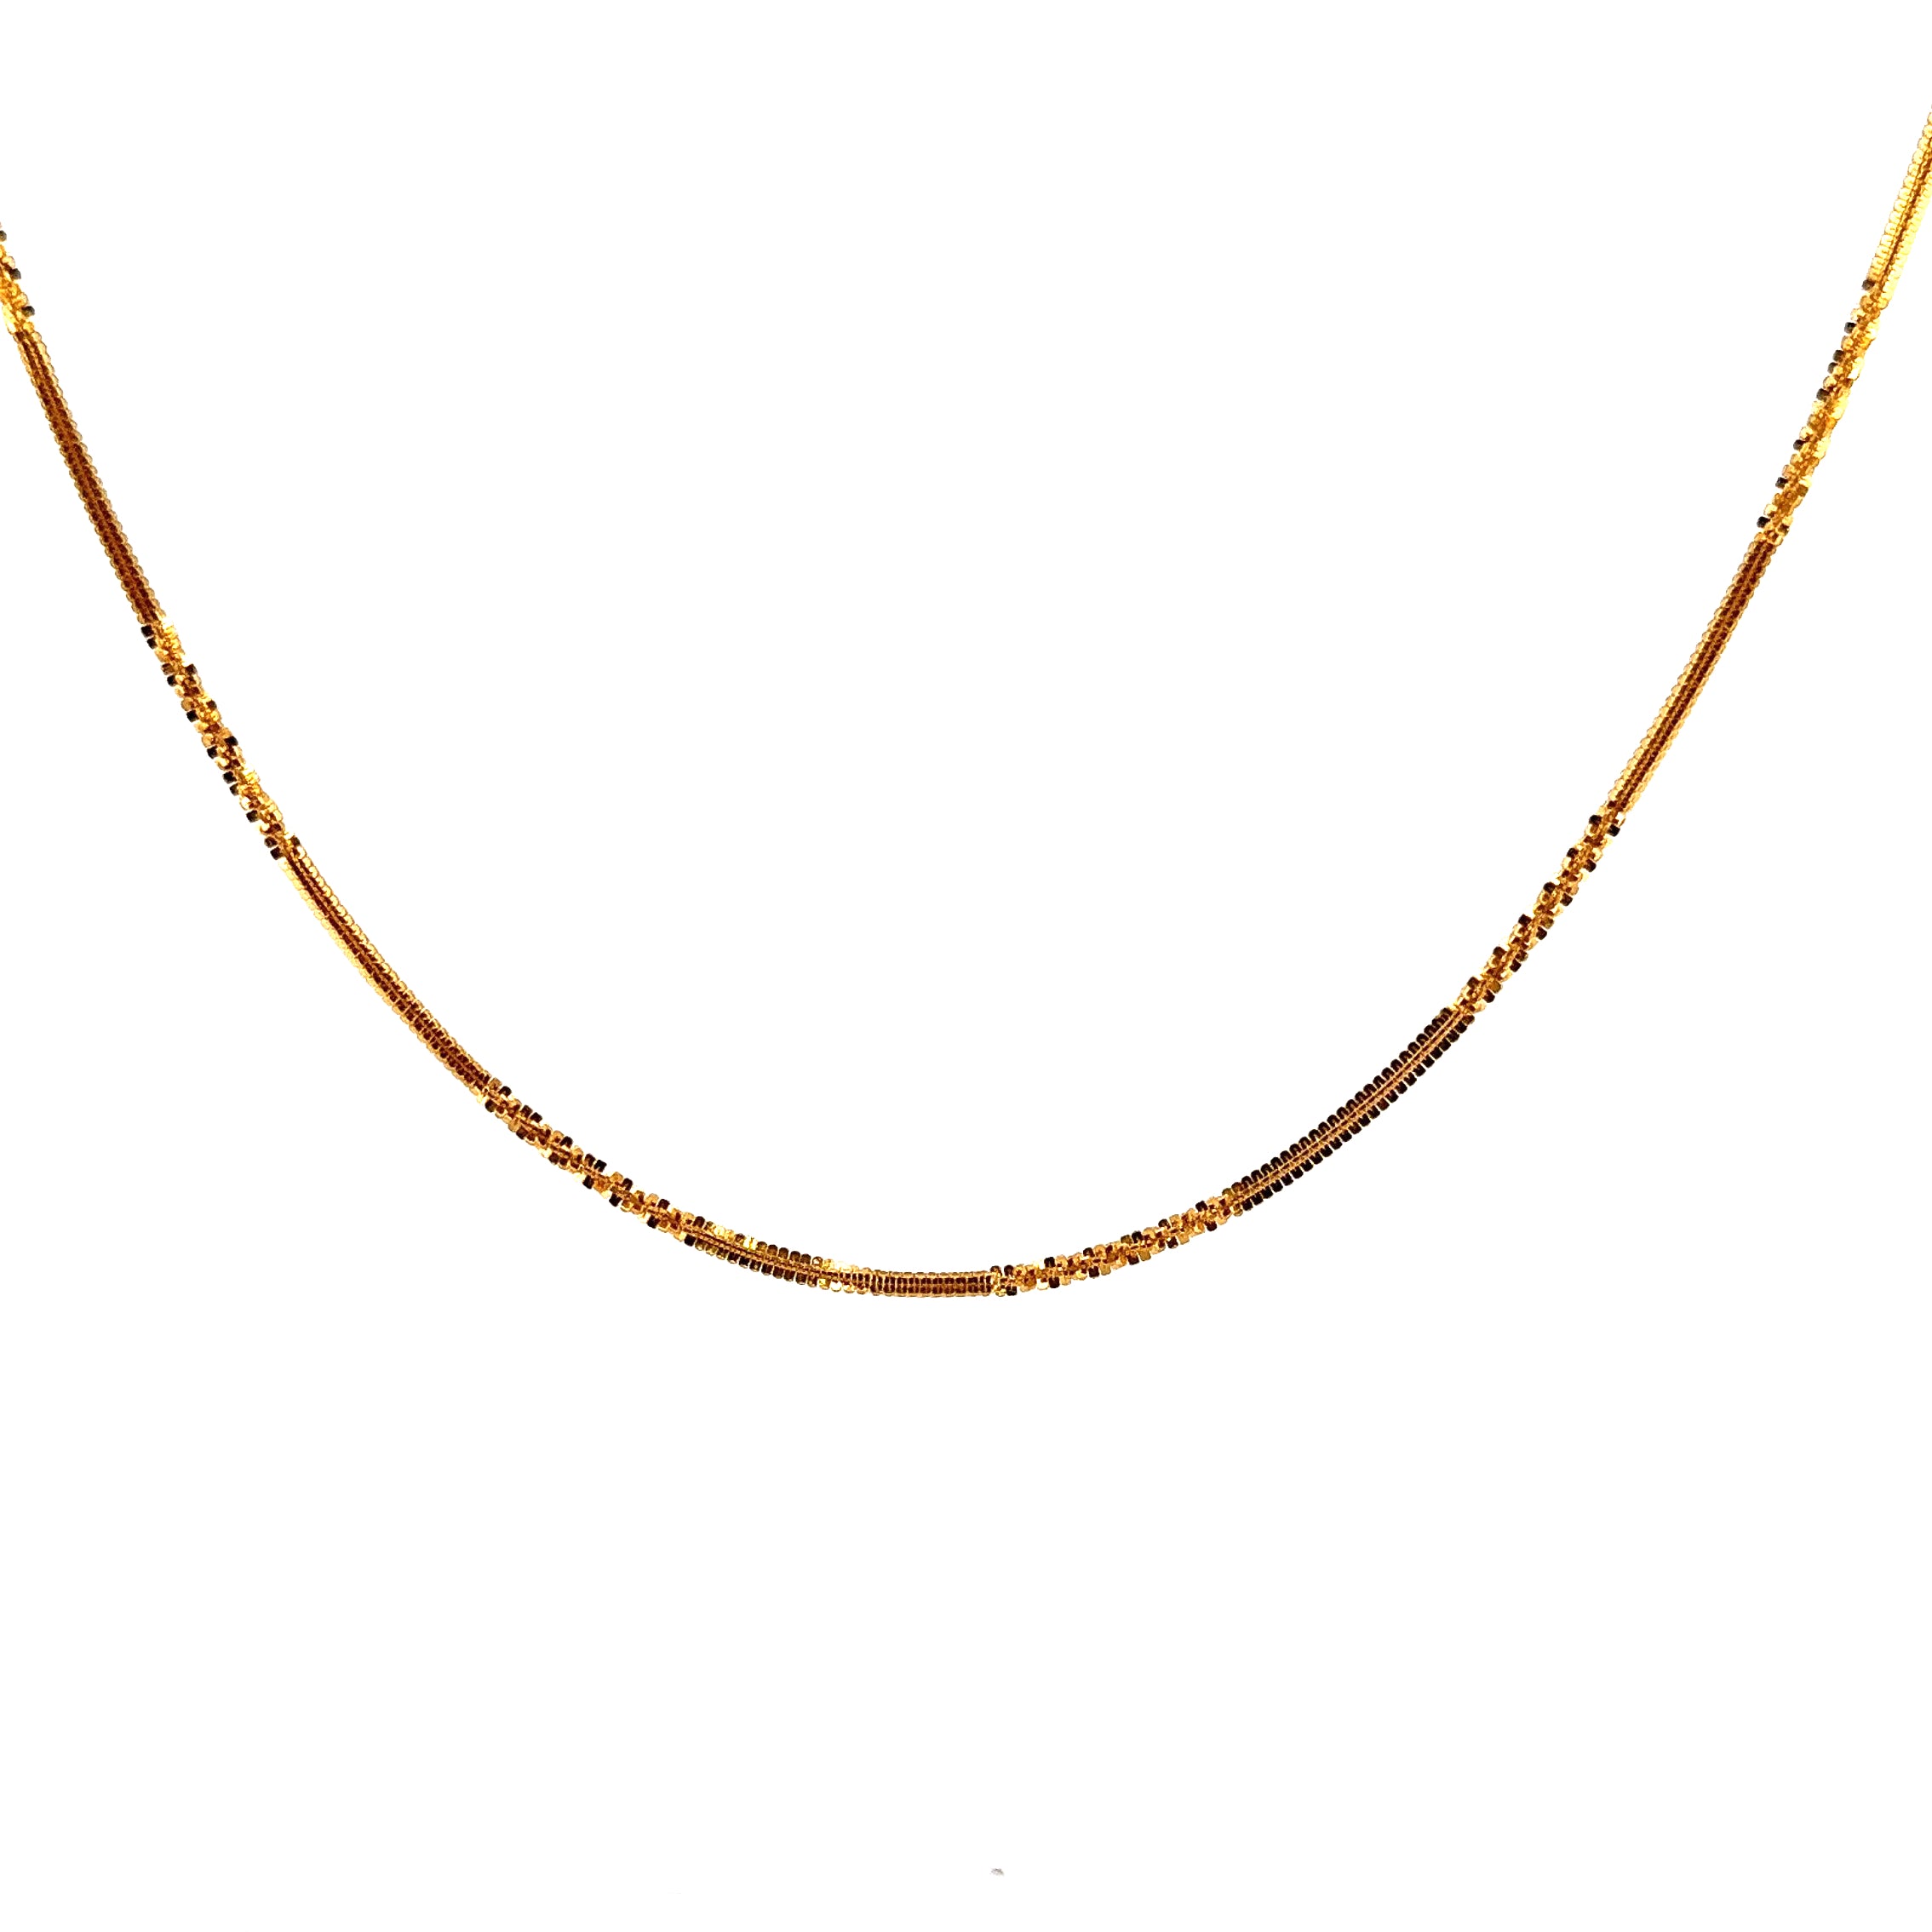 22ct gold necklace